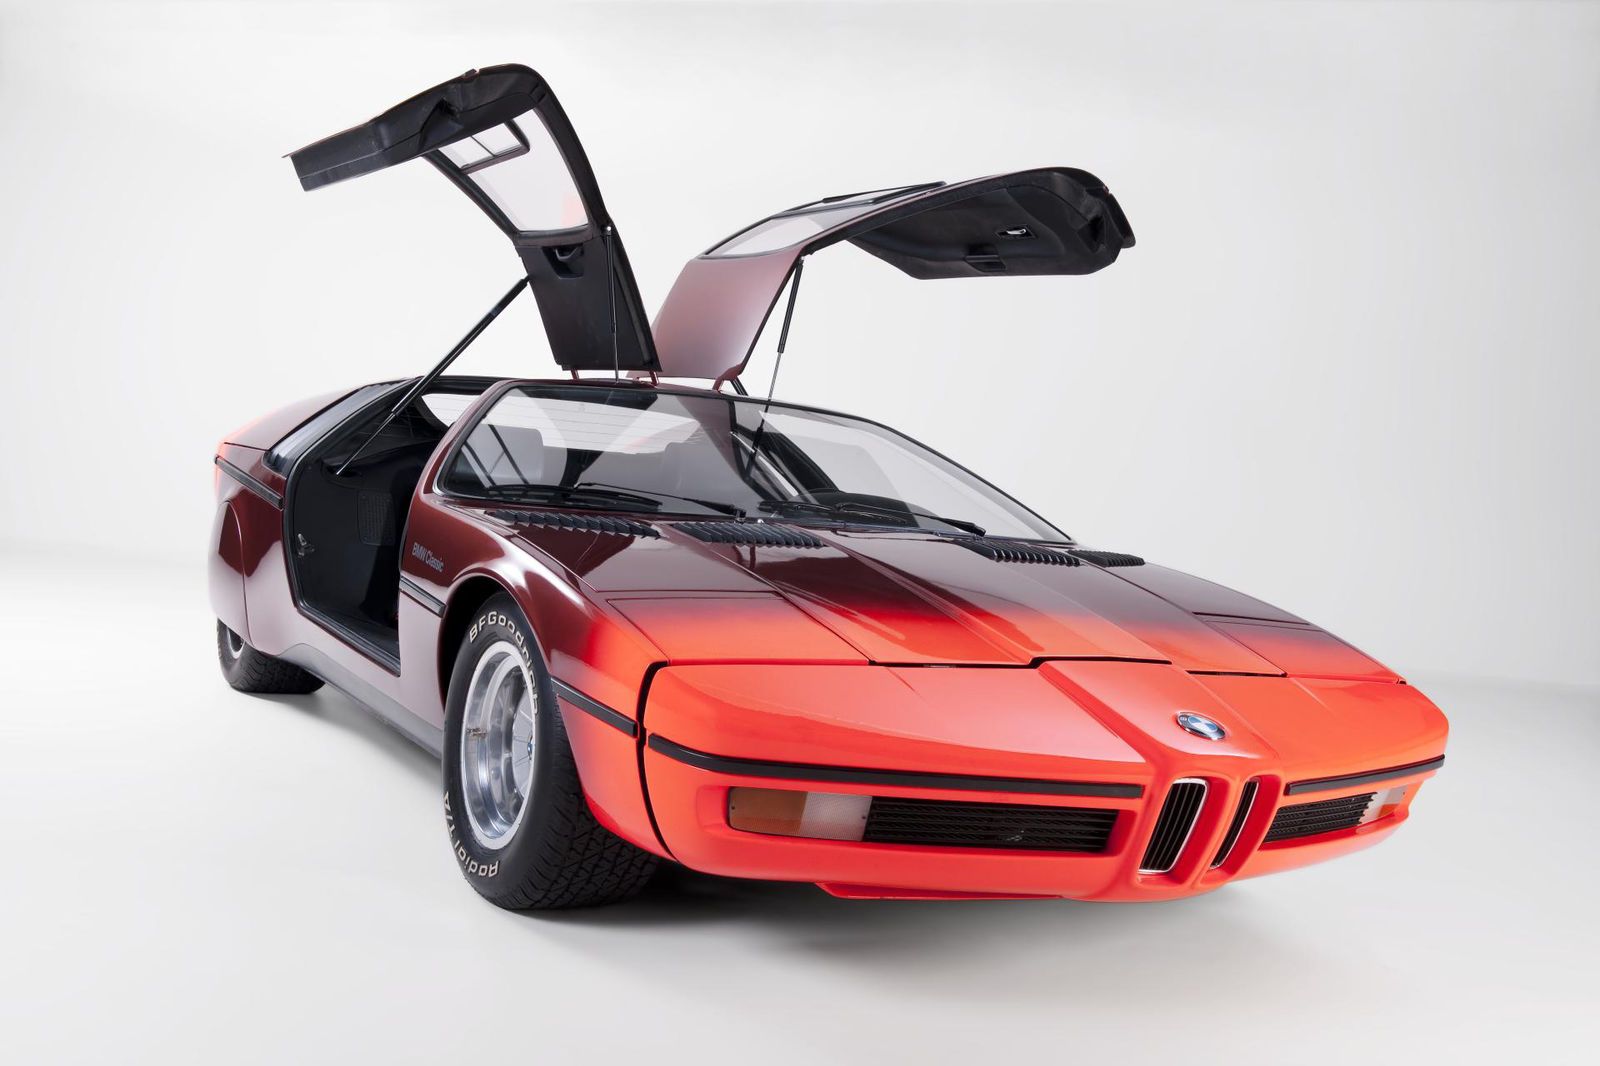 30 incredibly bonkers and beautiful cars from the 1950s to now image 2